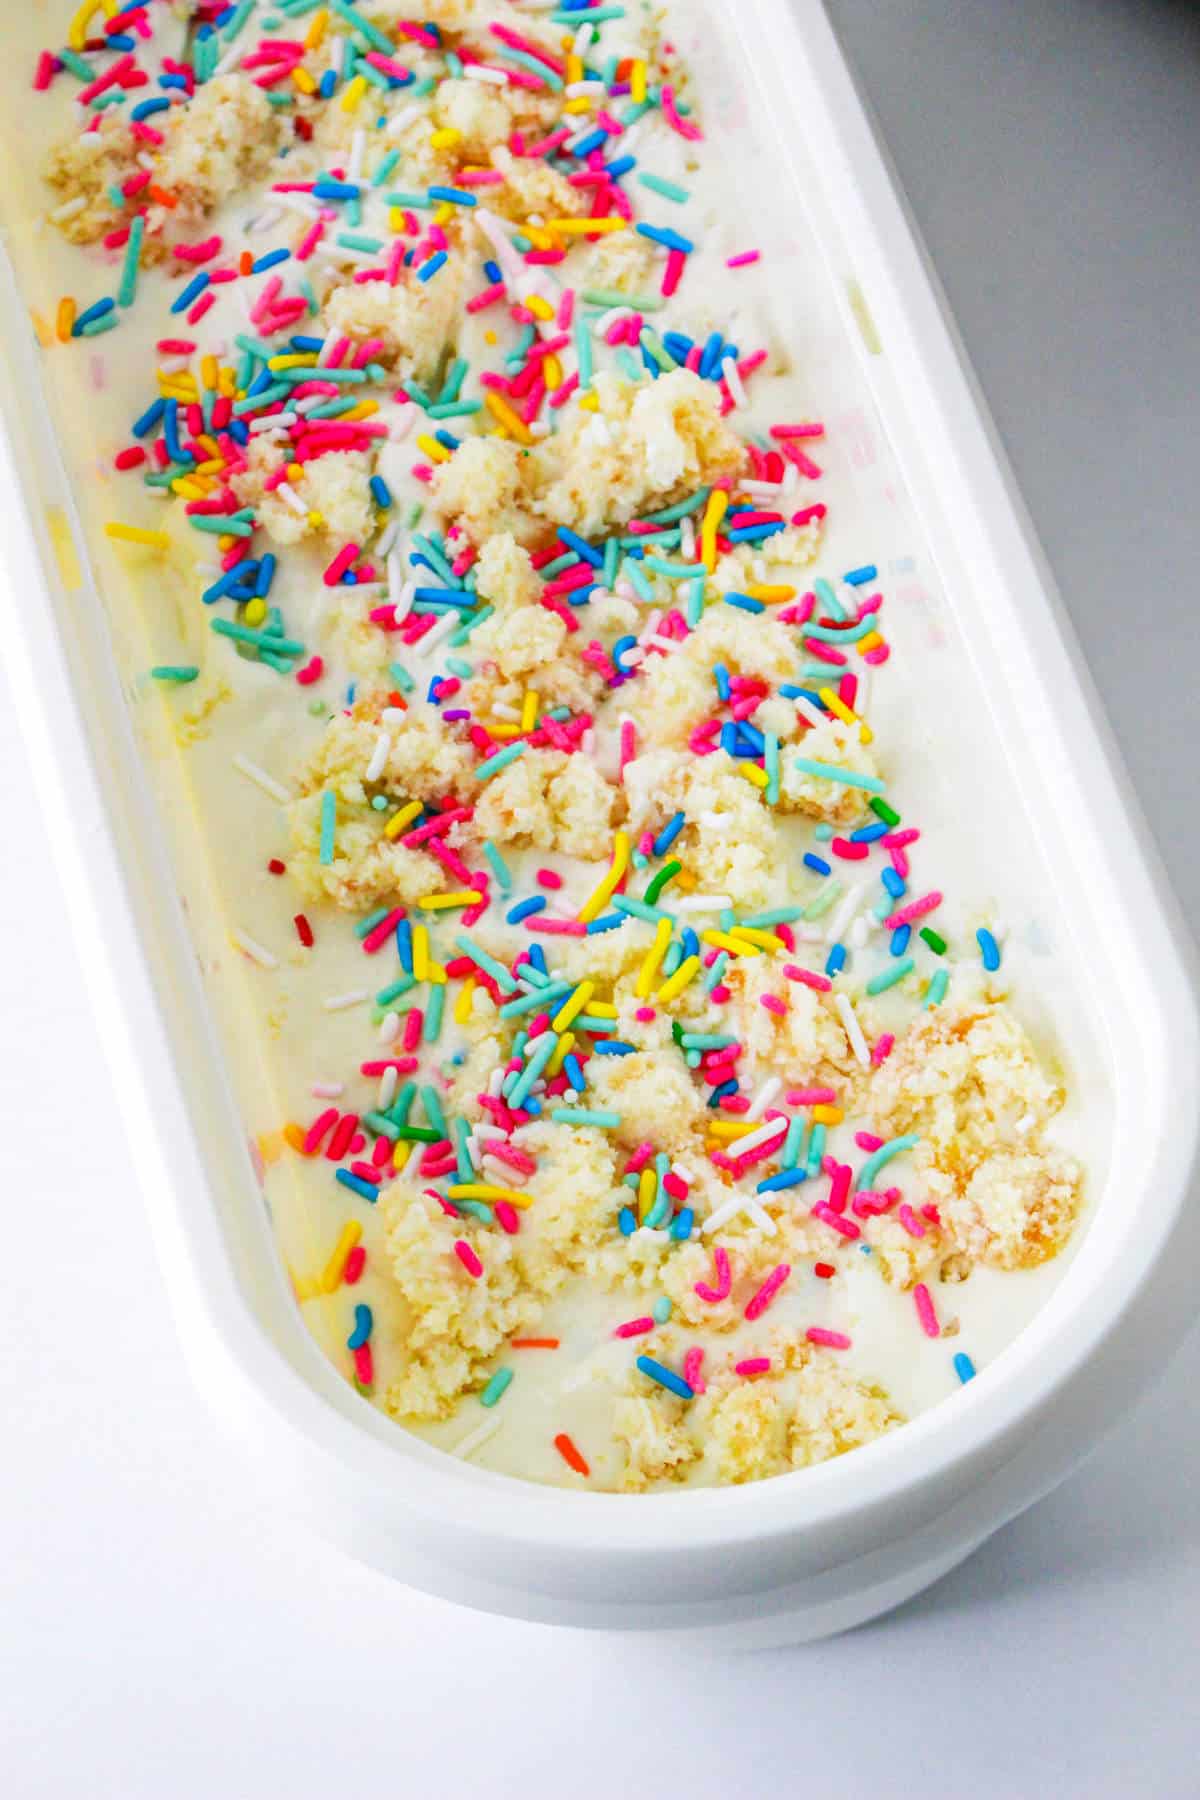 layers of ice cream, crumbled cupcake, and rainbow sprinkles in an ice cream hardening freezer container.